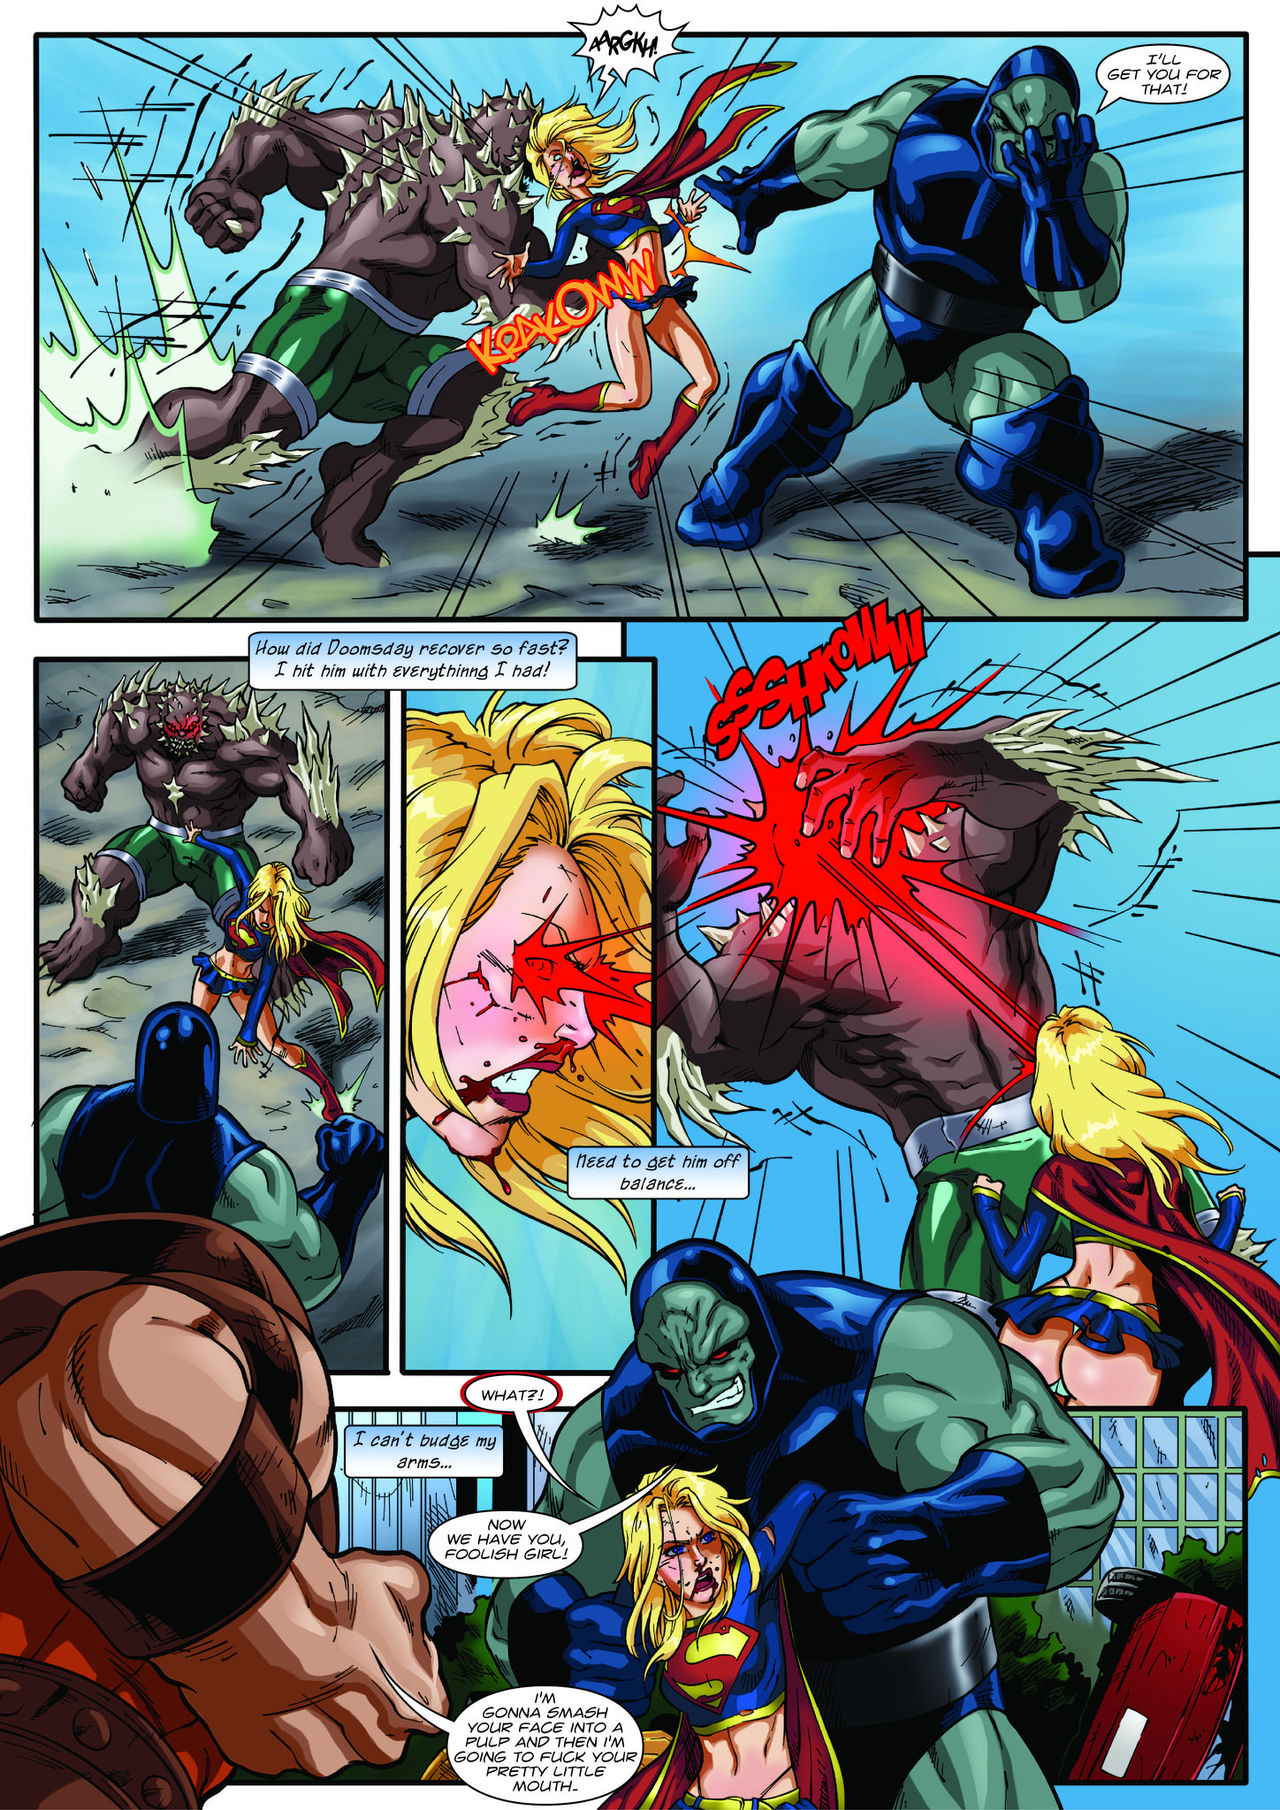 Anon2012_453287_Supergirls_Last_Stand_Page_7.jpg.